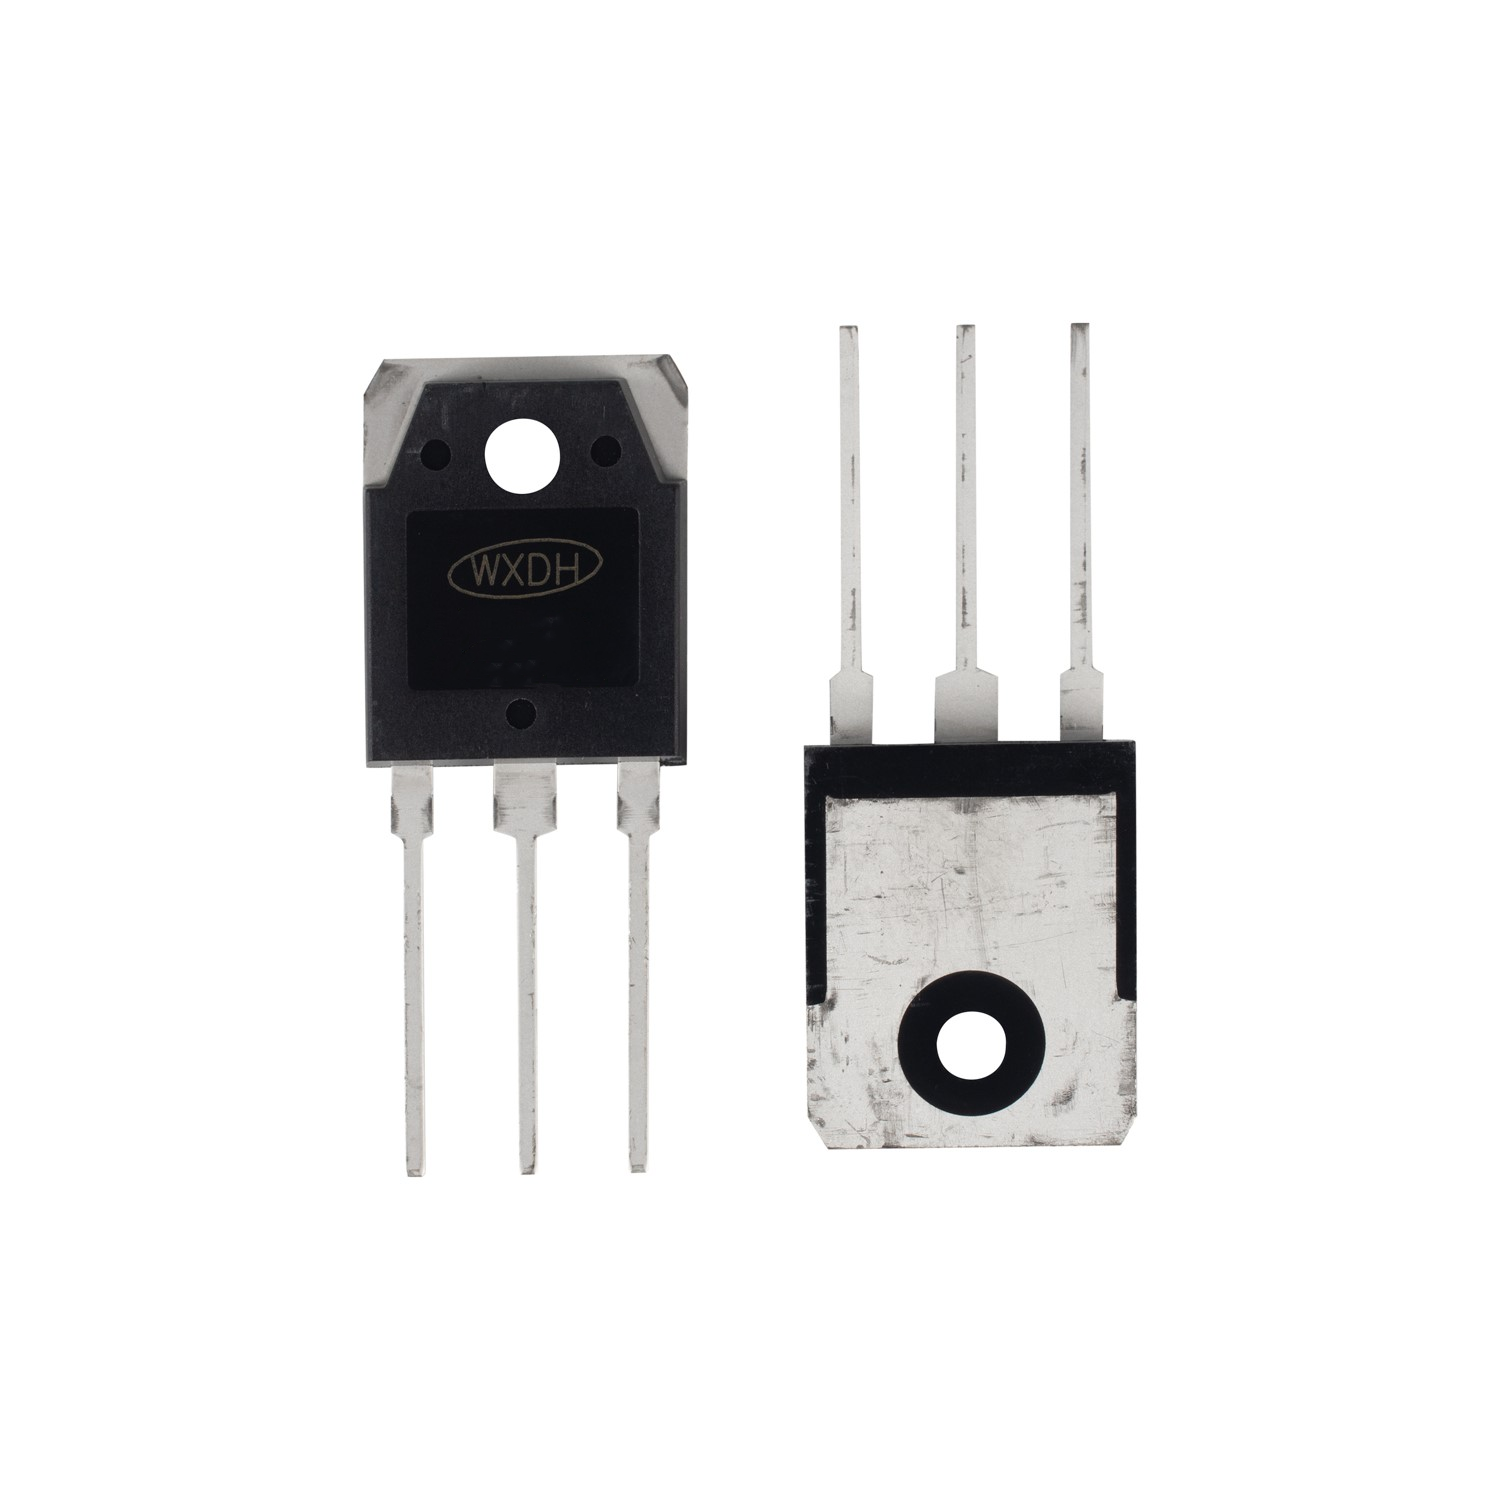 60A 300V Fast recovery diode MUR60G30NCT TO-3PN